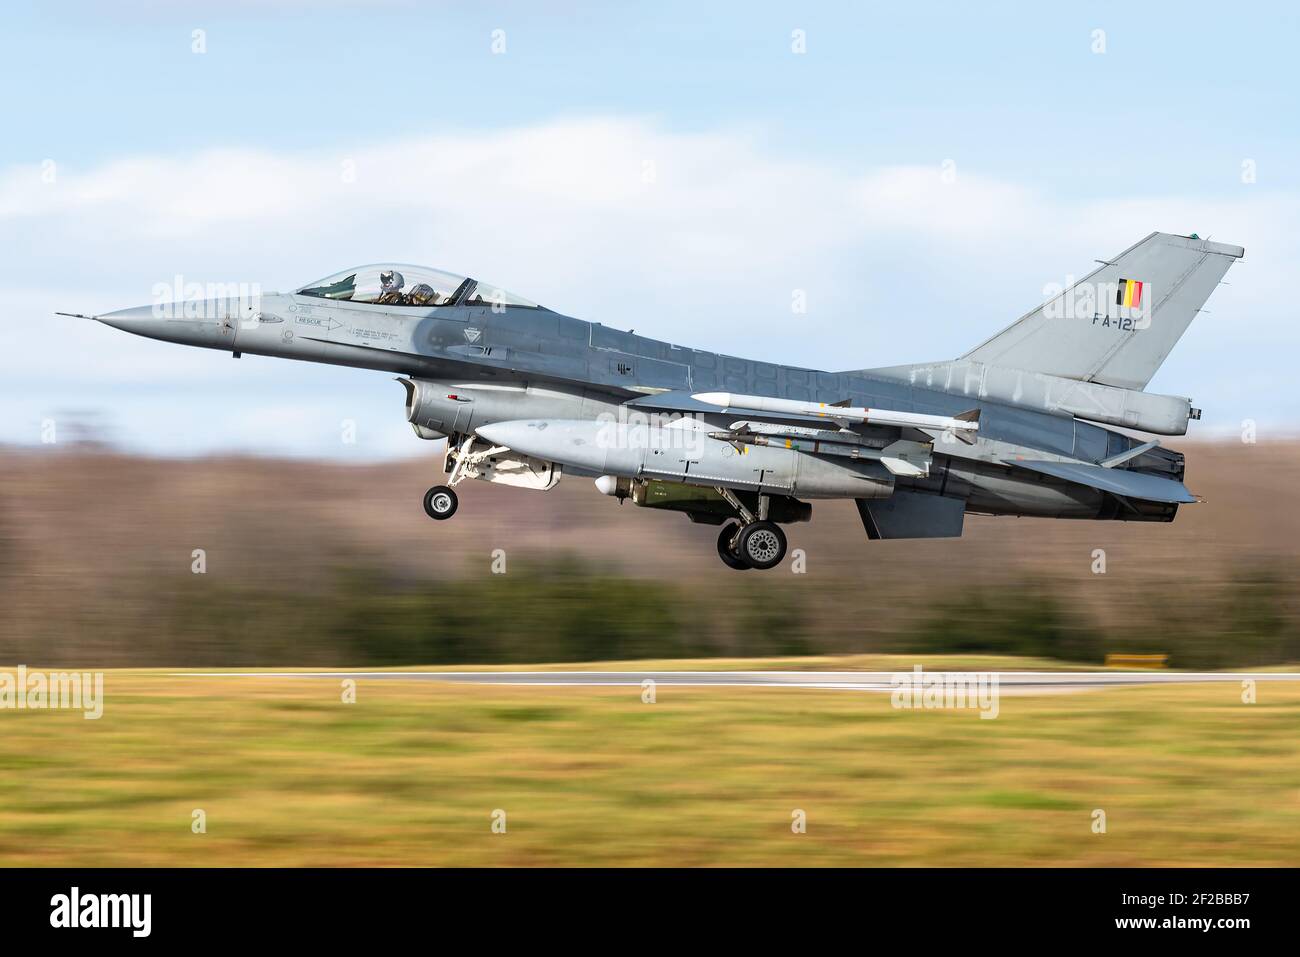 A Lockheed F-16 Fighting Falcon fighter jet of the Belgian Air Force at the Florennes Air Base. The F-16 is a single-engine multirole fighter jet. Stock Photo